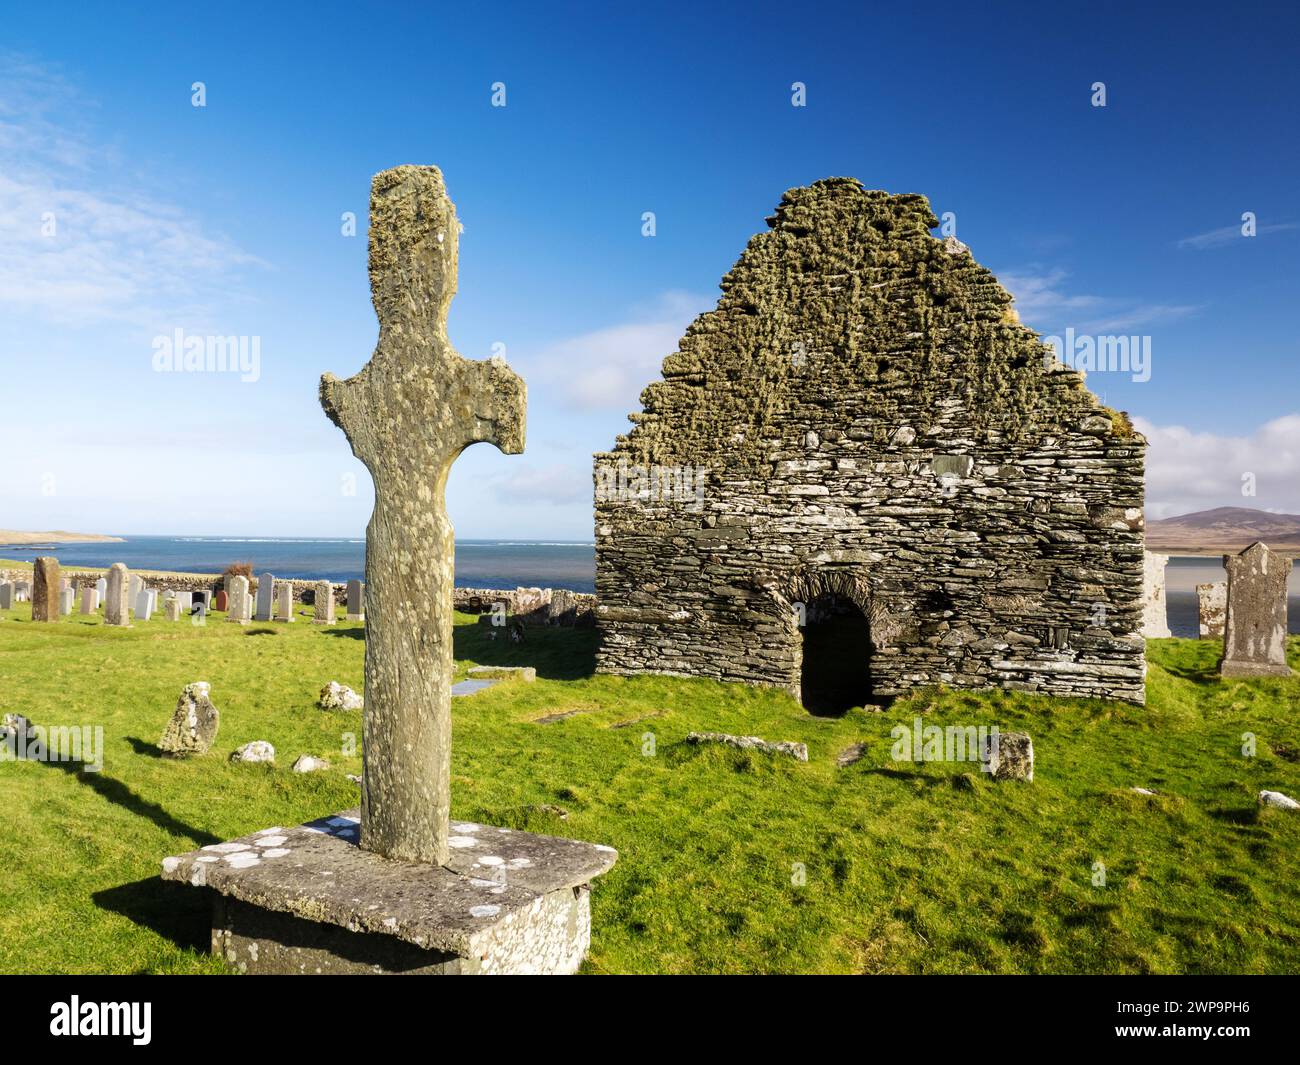 Kilnave Chapel and cross on Loch Gruinart, Islay, Scotland, UK, that was built around late 1300's with the cross constructed around 700. Stock Photo